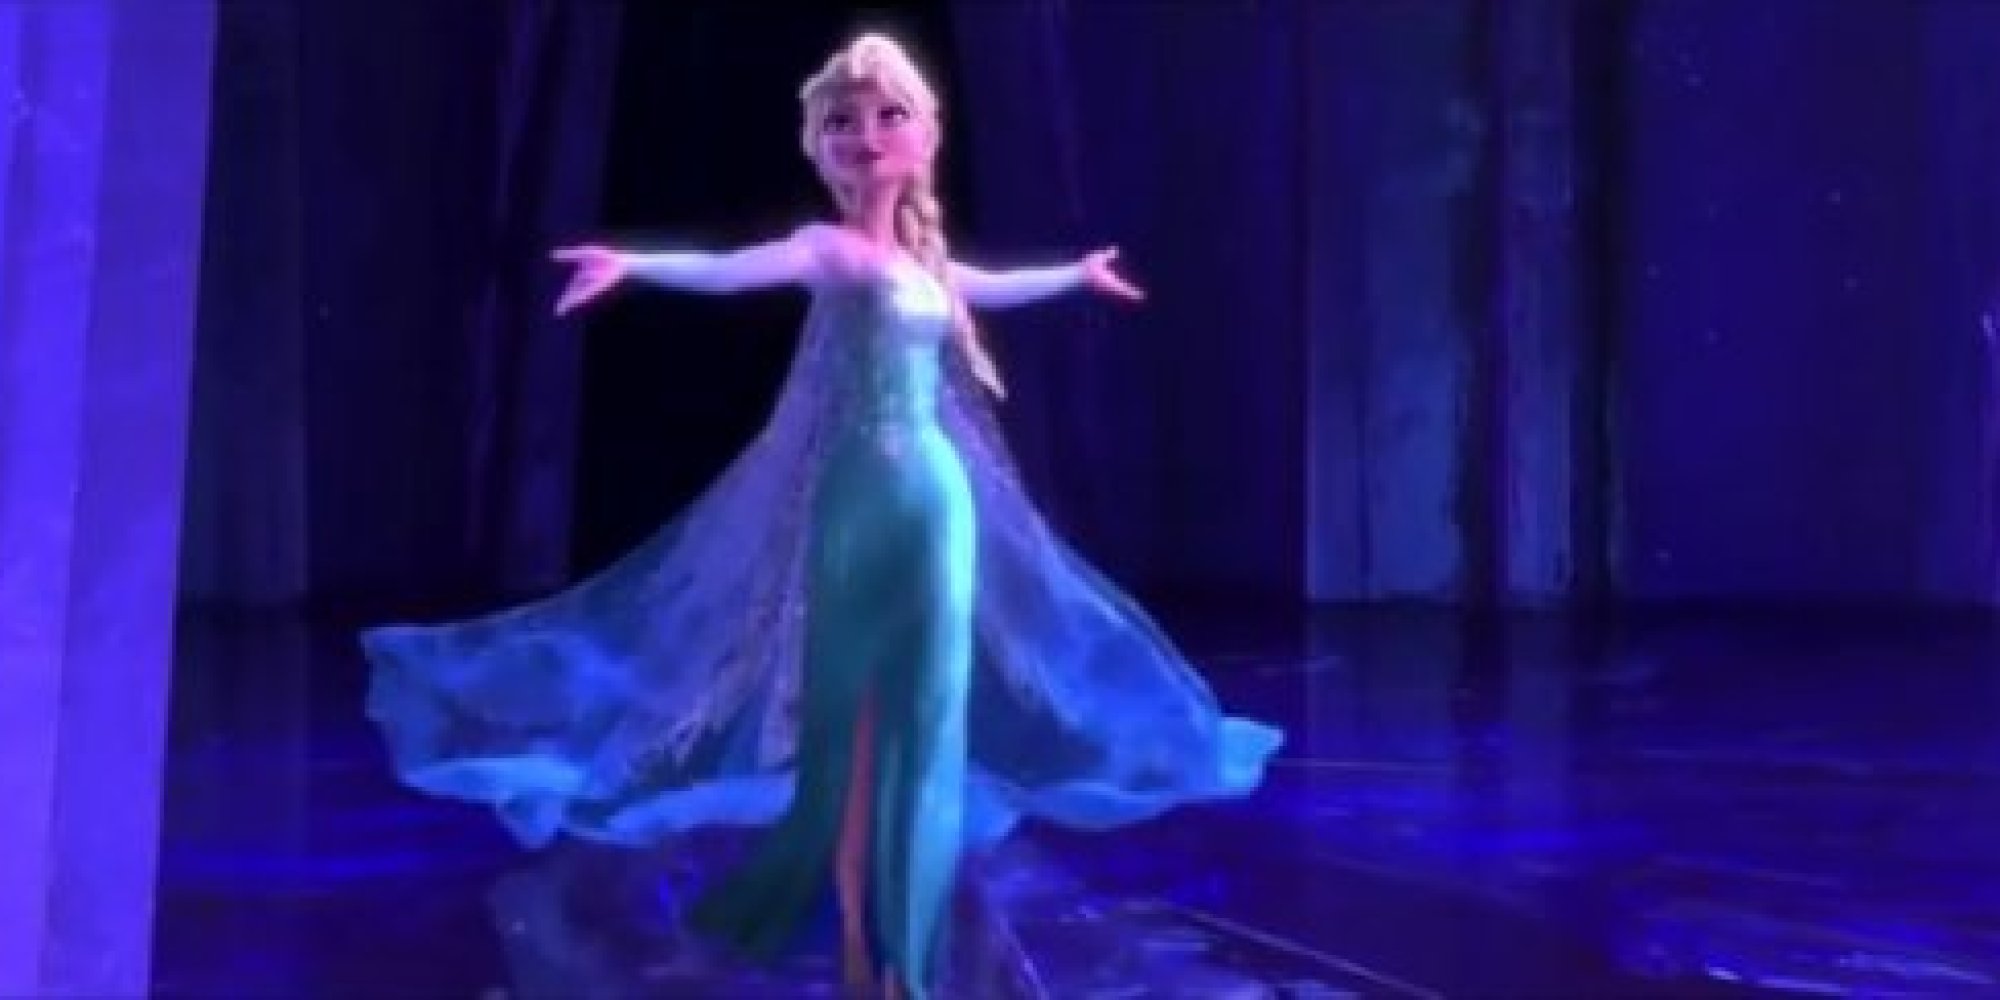 The Sexy Frozen Moment No One Is Talking About